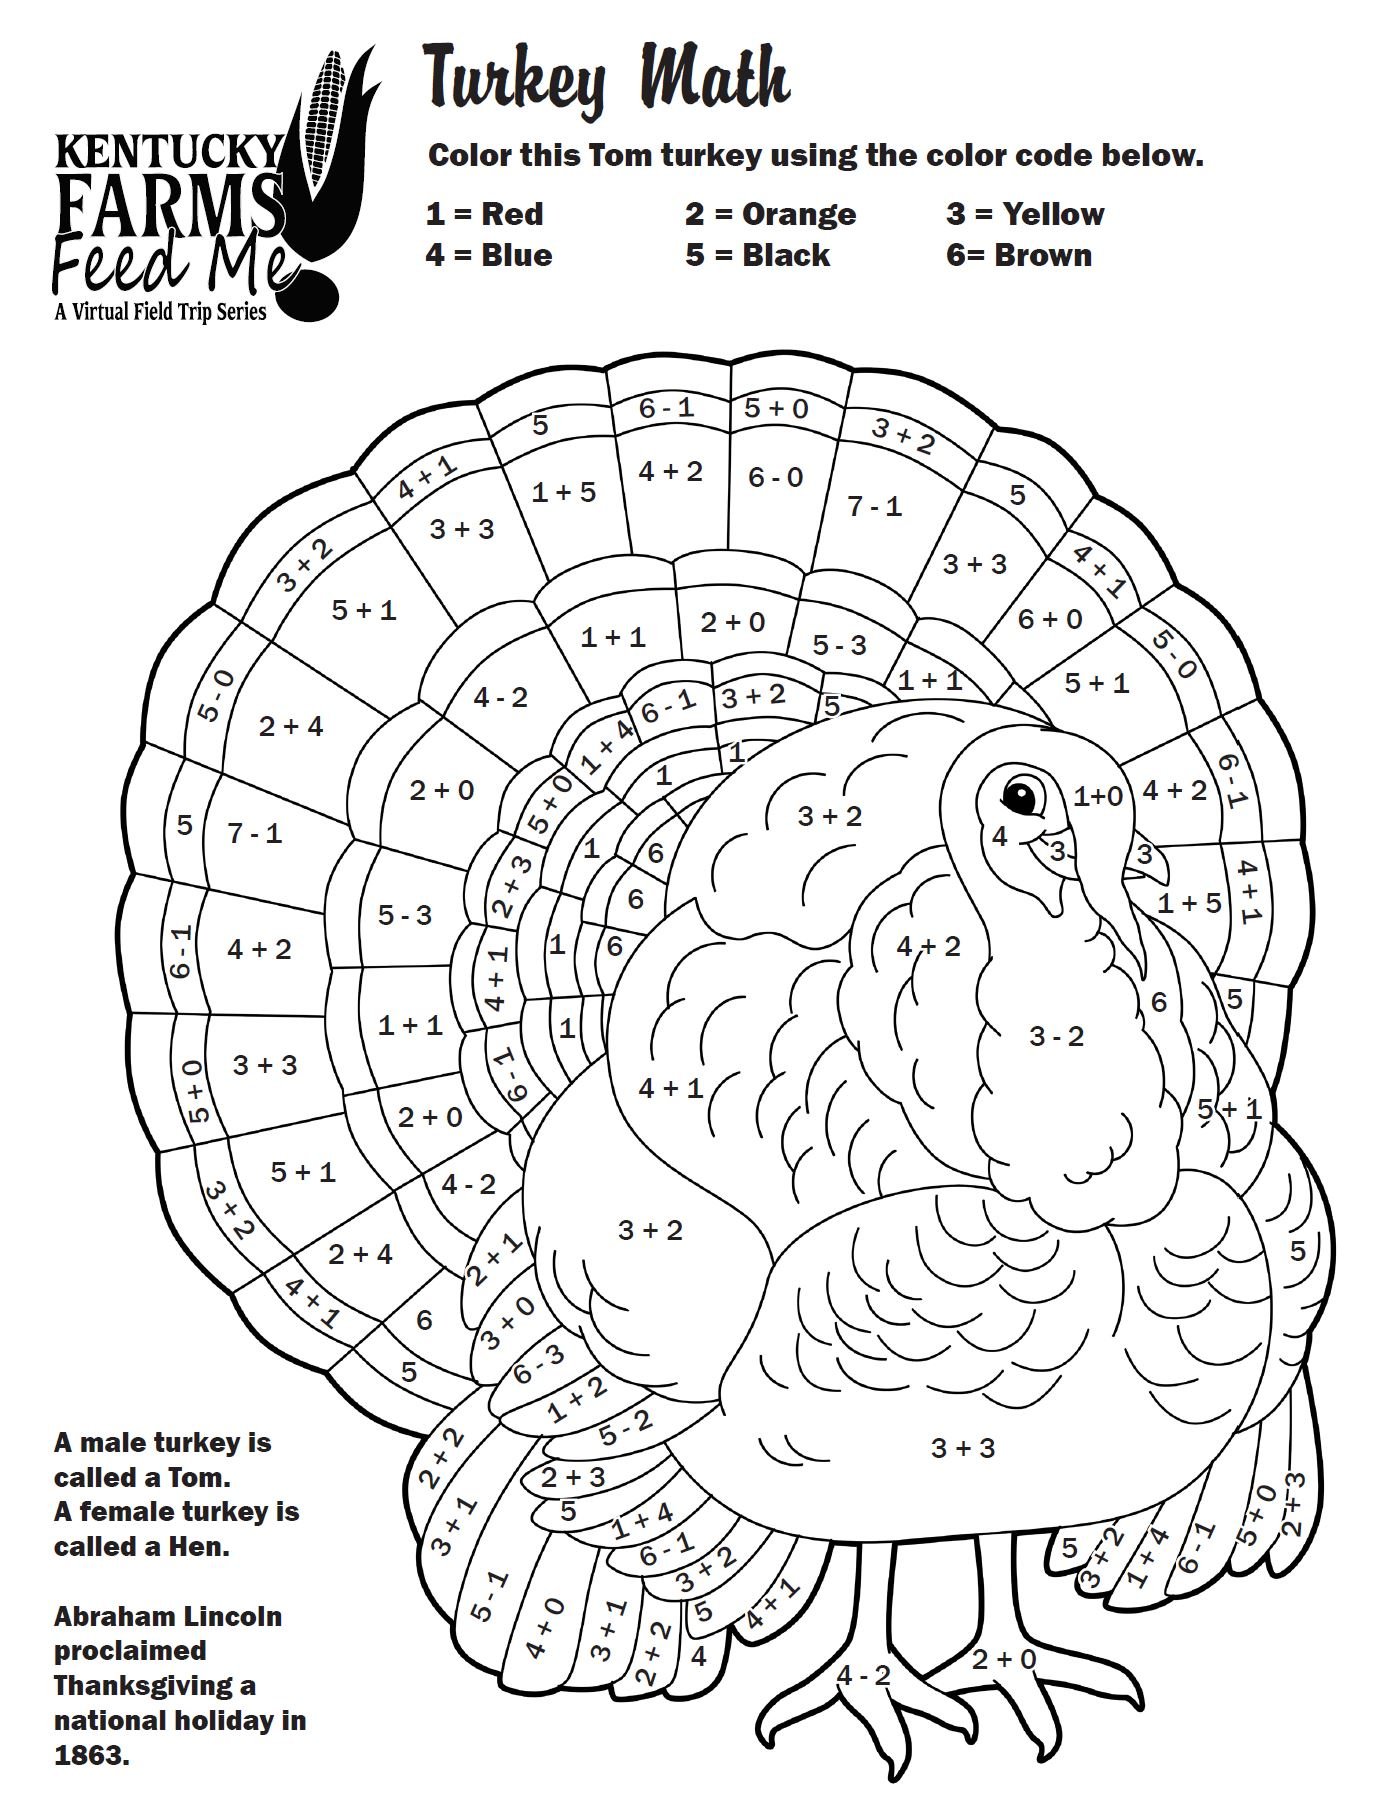 poultry-kffm-kentucky-agriculture-and-environment-in-the-classroom-programs-and-lessons